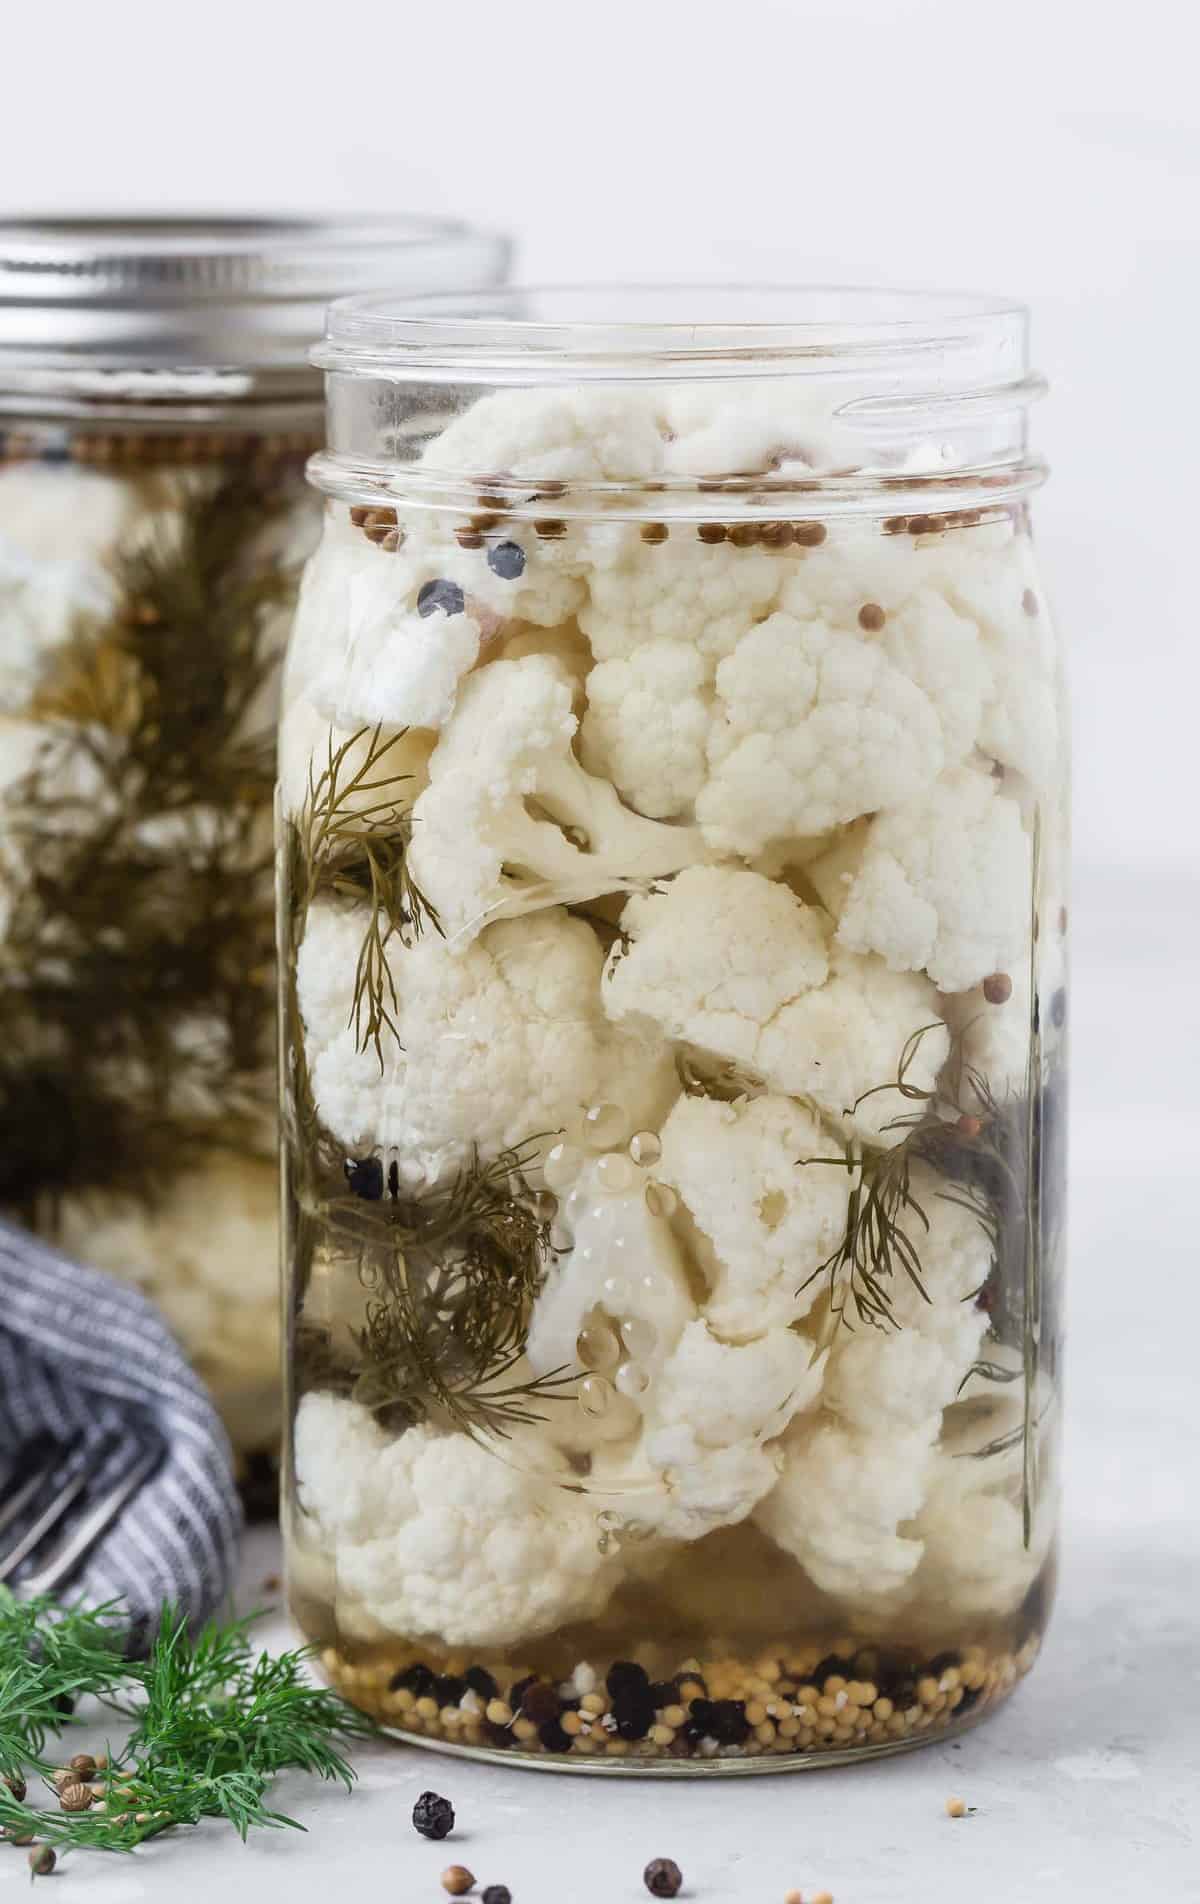 Jar of pickled cauliflower with dill and peppercorns, another jar in background.